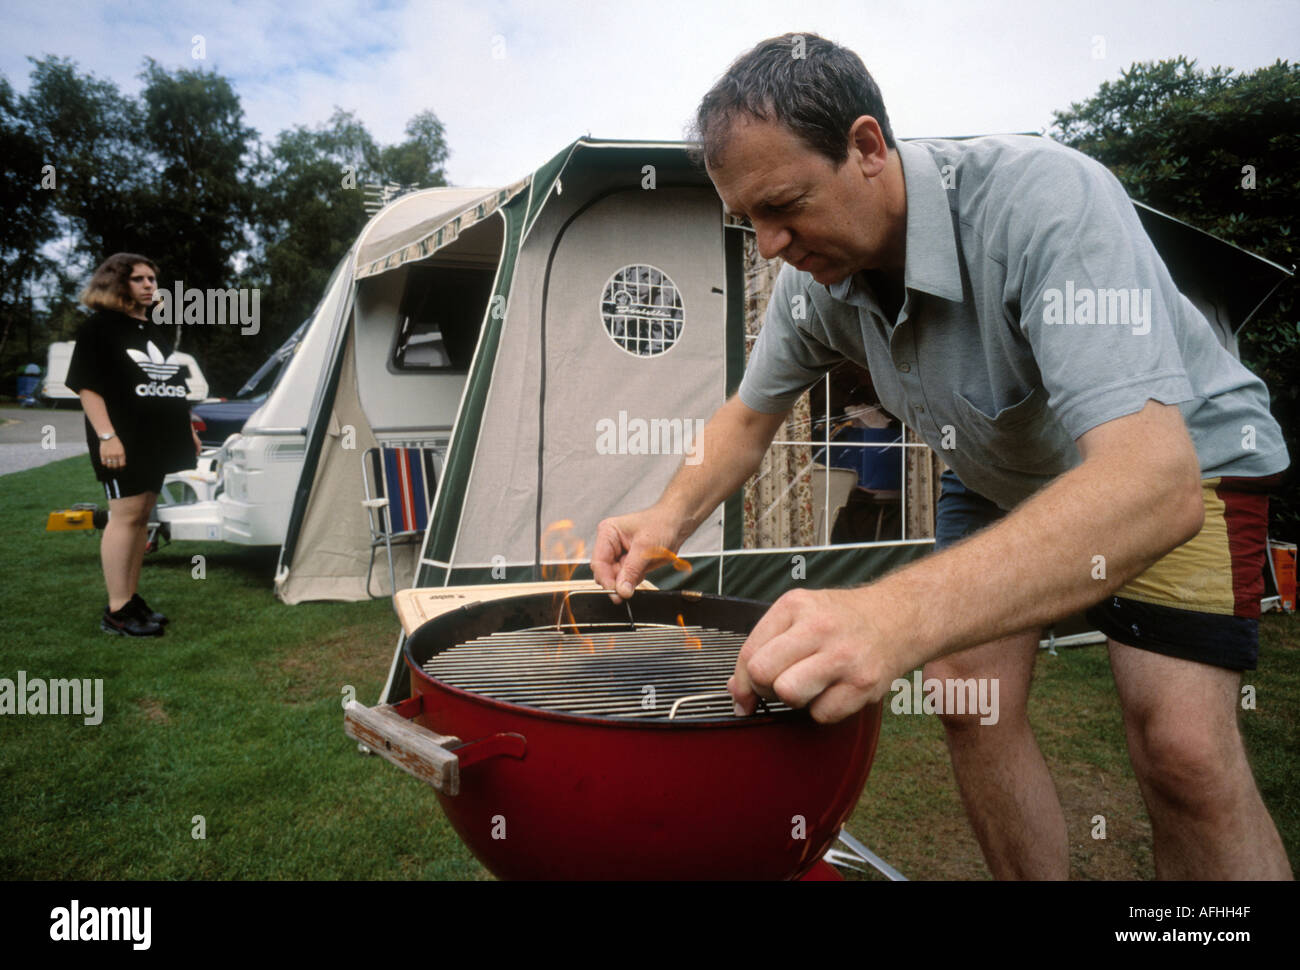 Caravaning holiday makers have a barbecue in Hastings South England UK Stock Photo